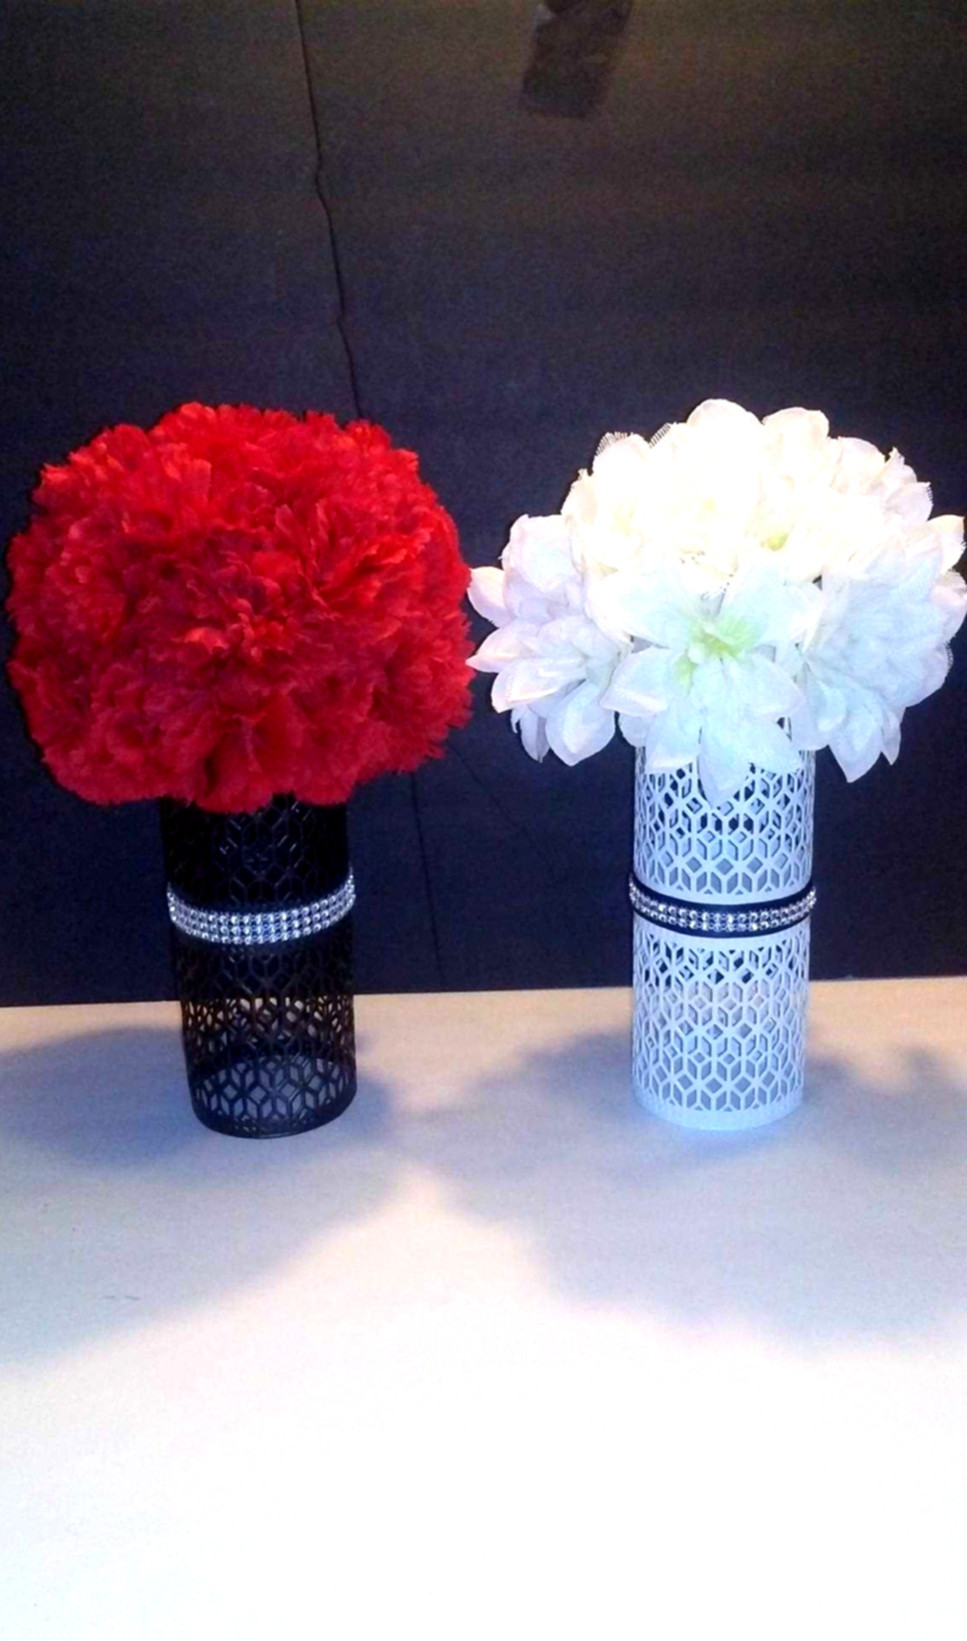 29 Fabulous Diy Glass Vase Ideas 2024 free download diy glass vase ideas of diy dollar tree glam vases diy floral home decor one dollar with regard to diy dollar tree glam vases diy floral home decor one dollar pictures